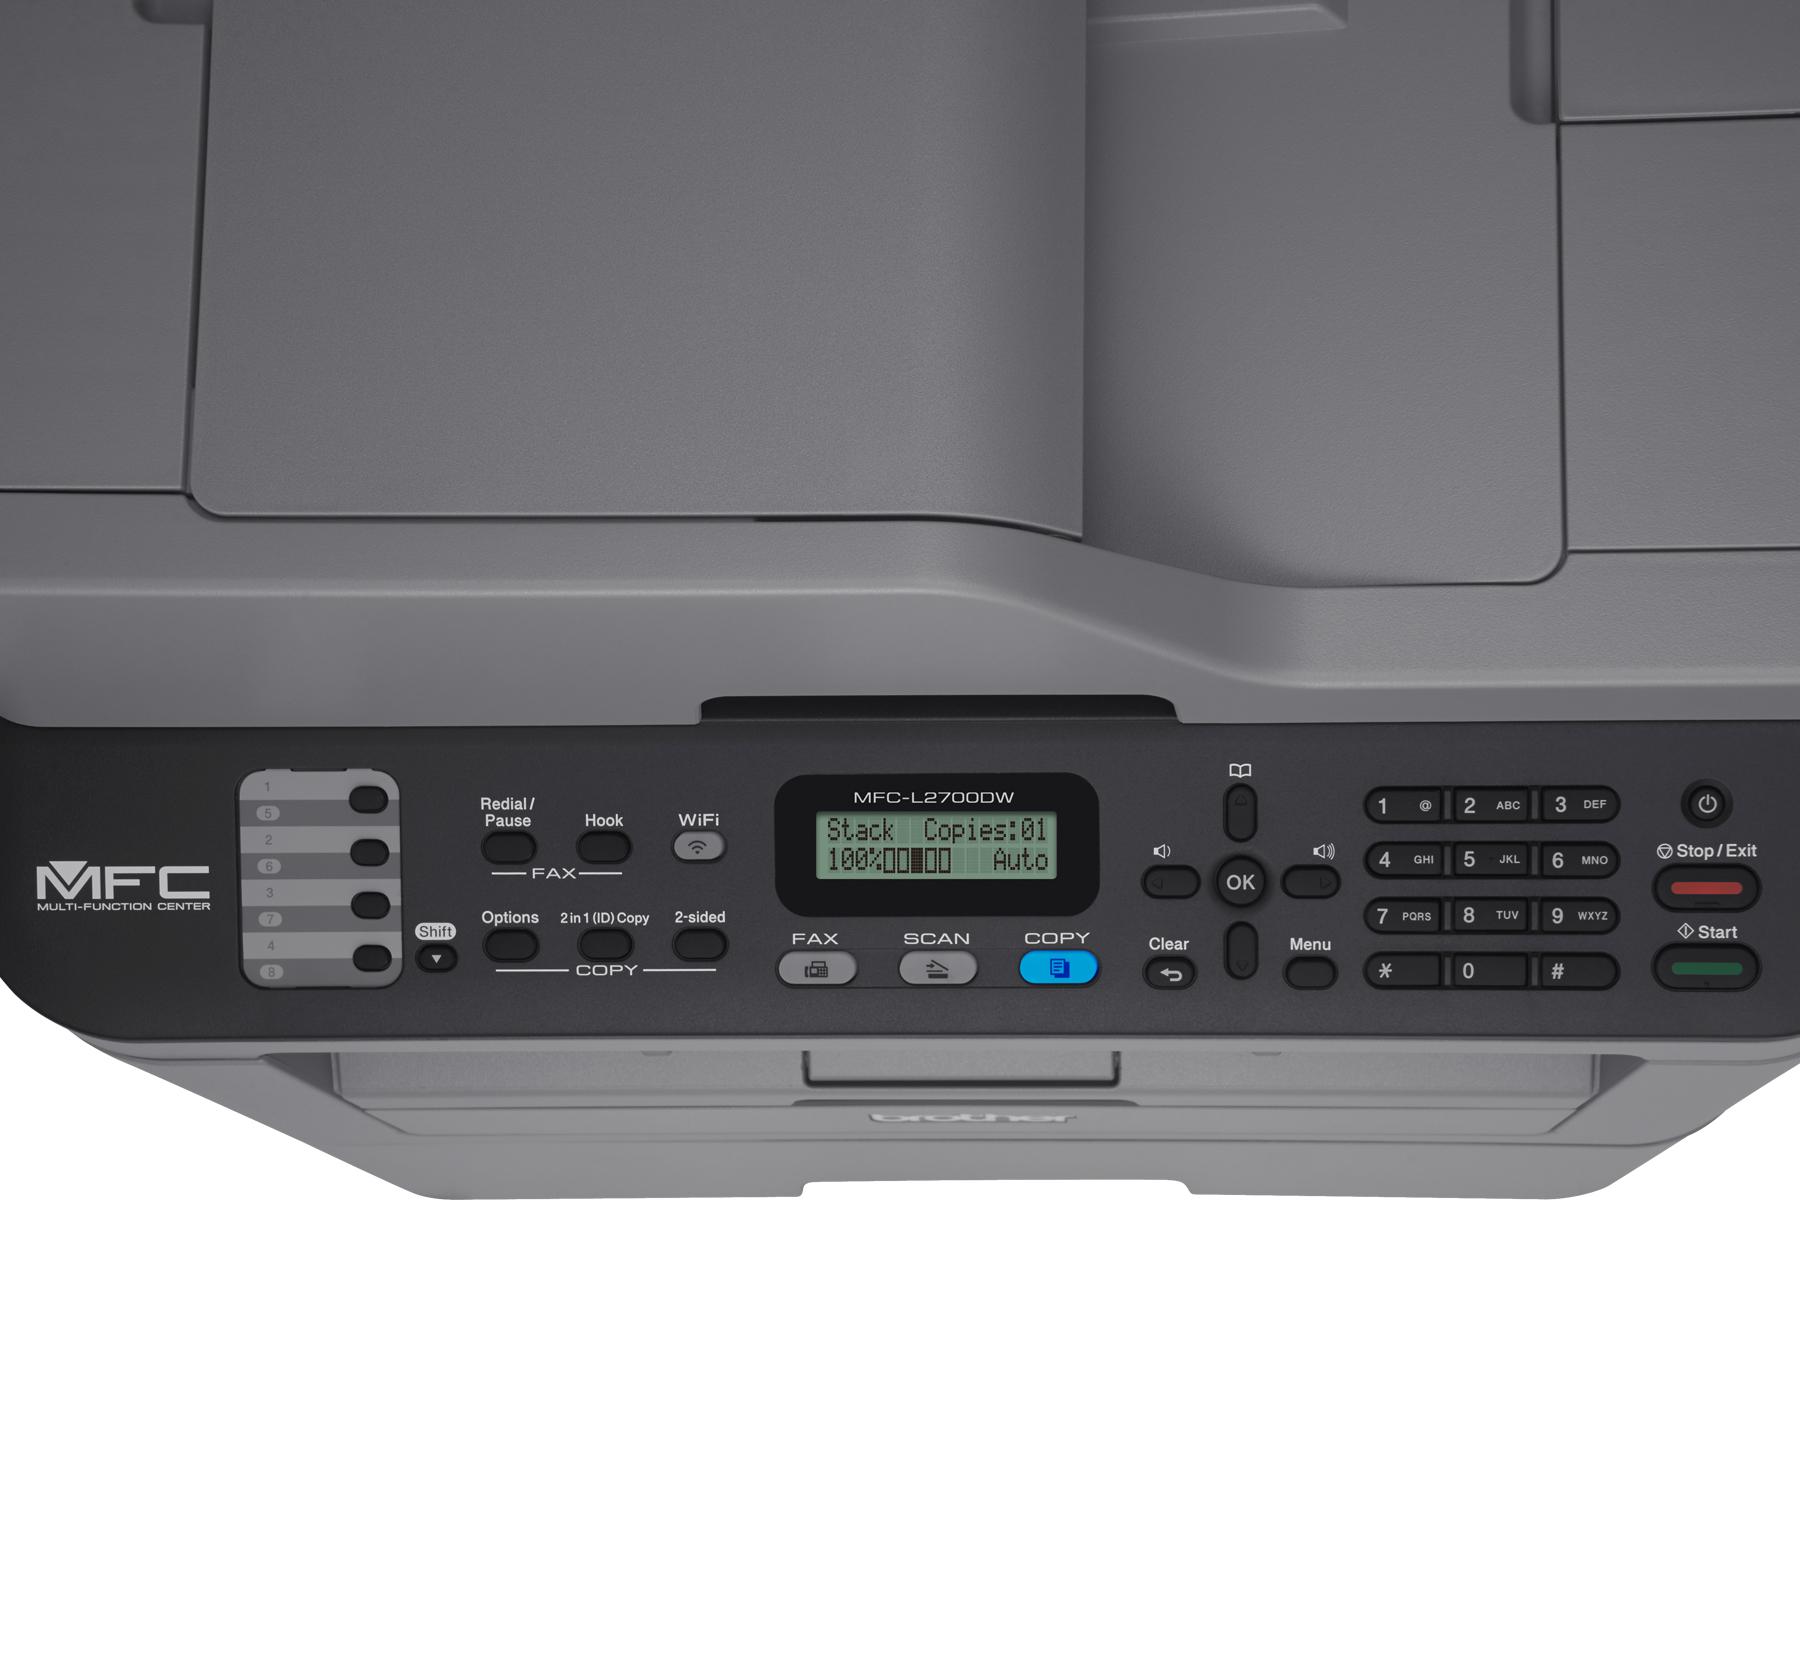 Brother MFC-L2700DW Suitable For Heavy Personal Use and Small Offices - Wholesale Blog